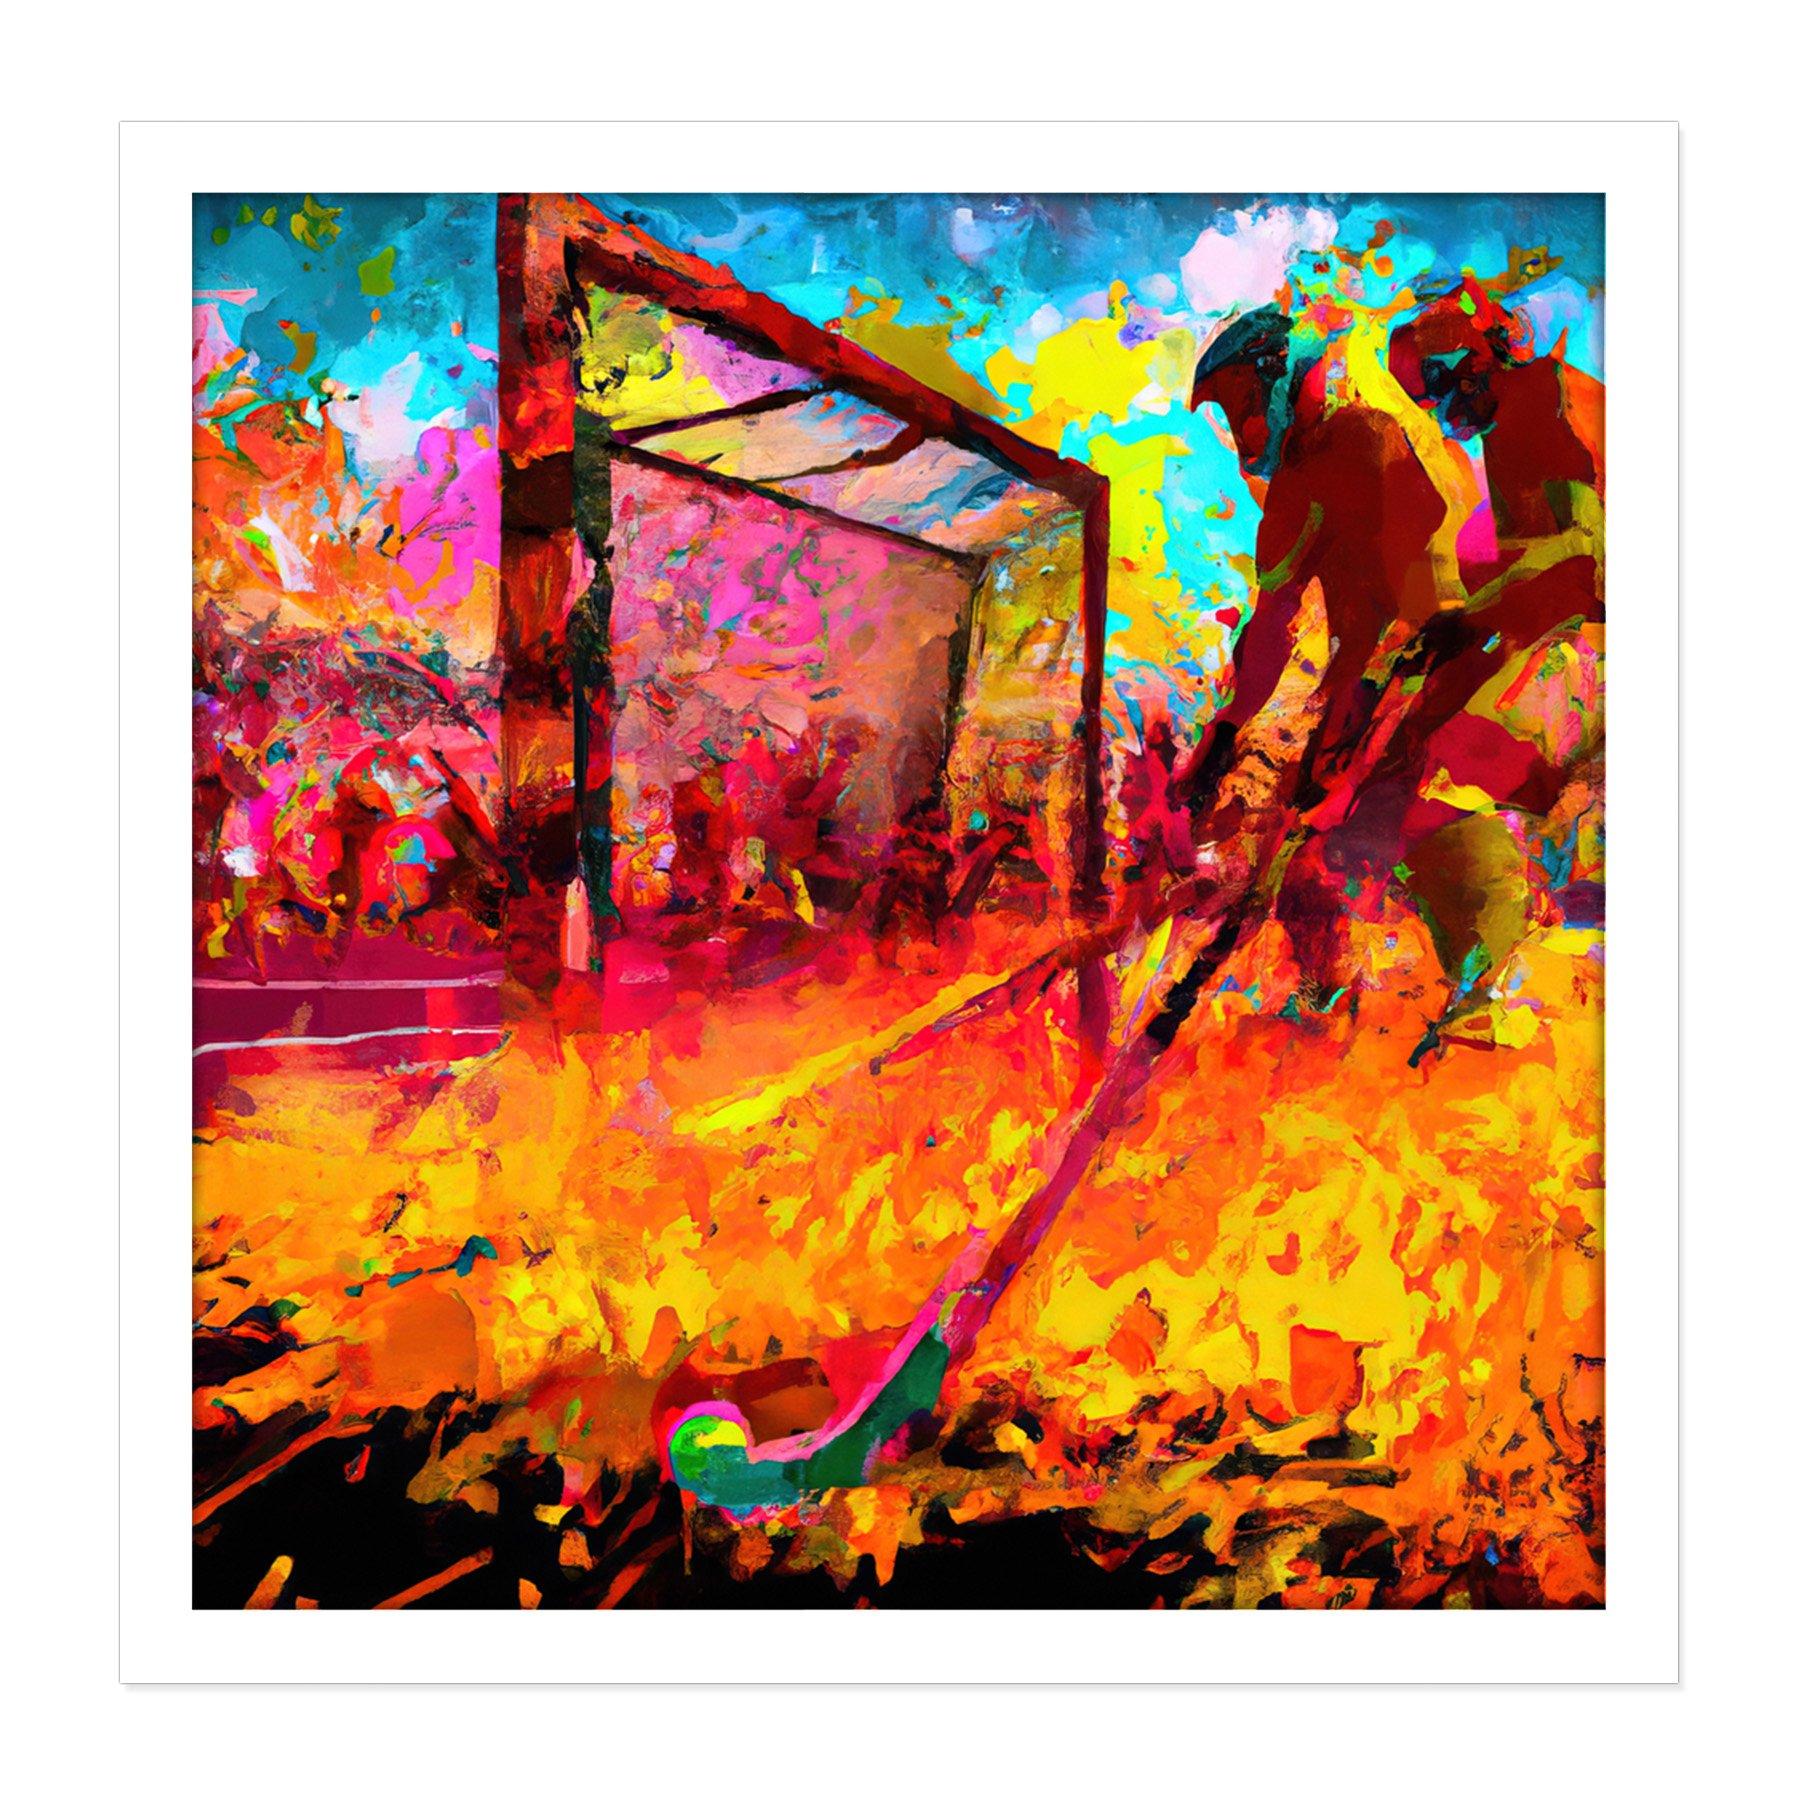 Field Hockey Game Abstract Vibrant Colourful Oil Painting Square Framed Wall Art Print Picture 16X16 Inch